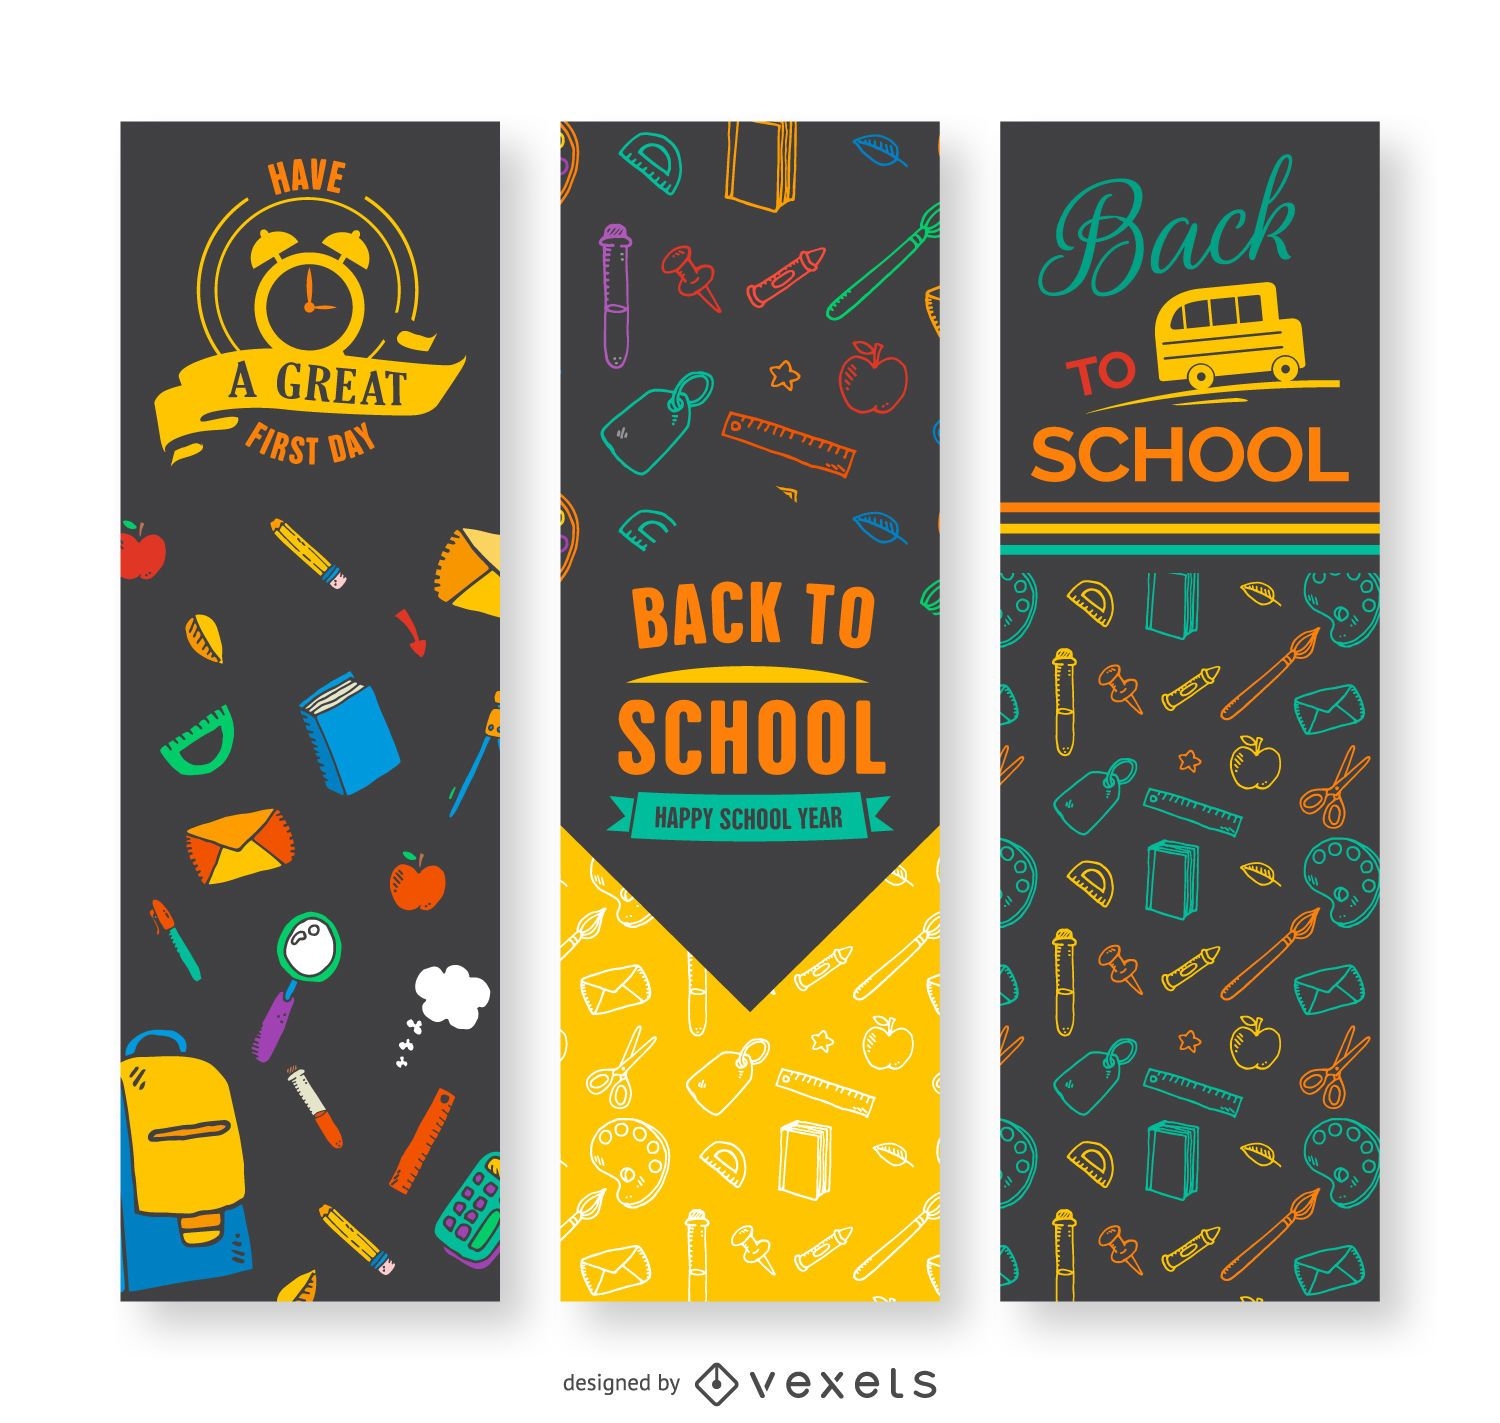 Back to school vertical banners